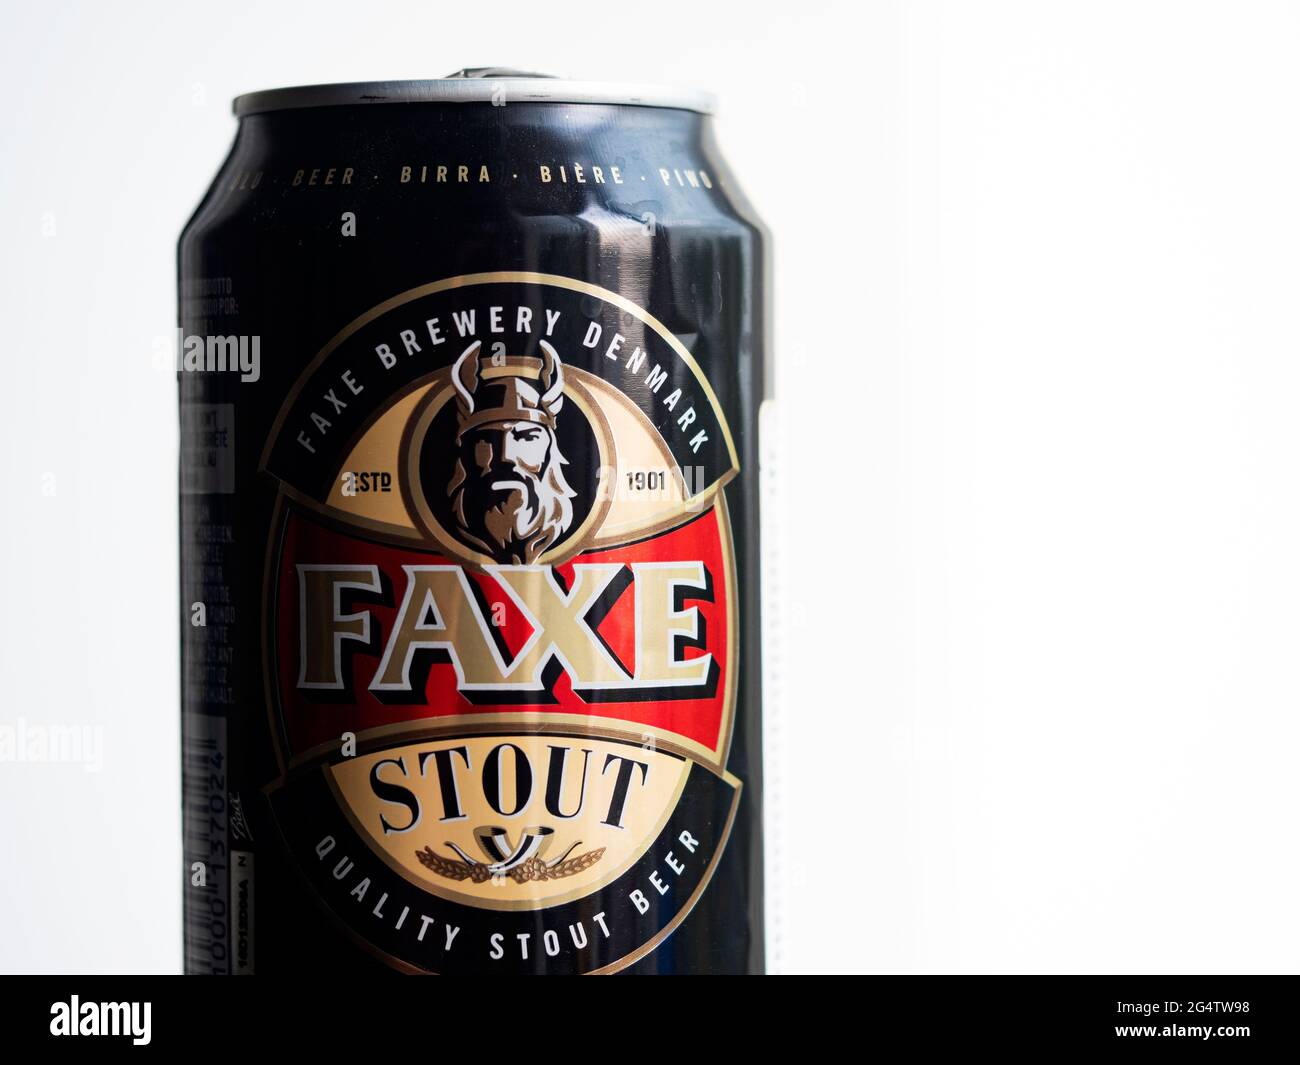 Cans of Faxe Stout beer on white background Stock Photo - Alamy